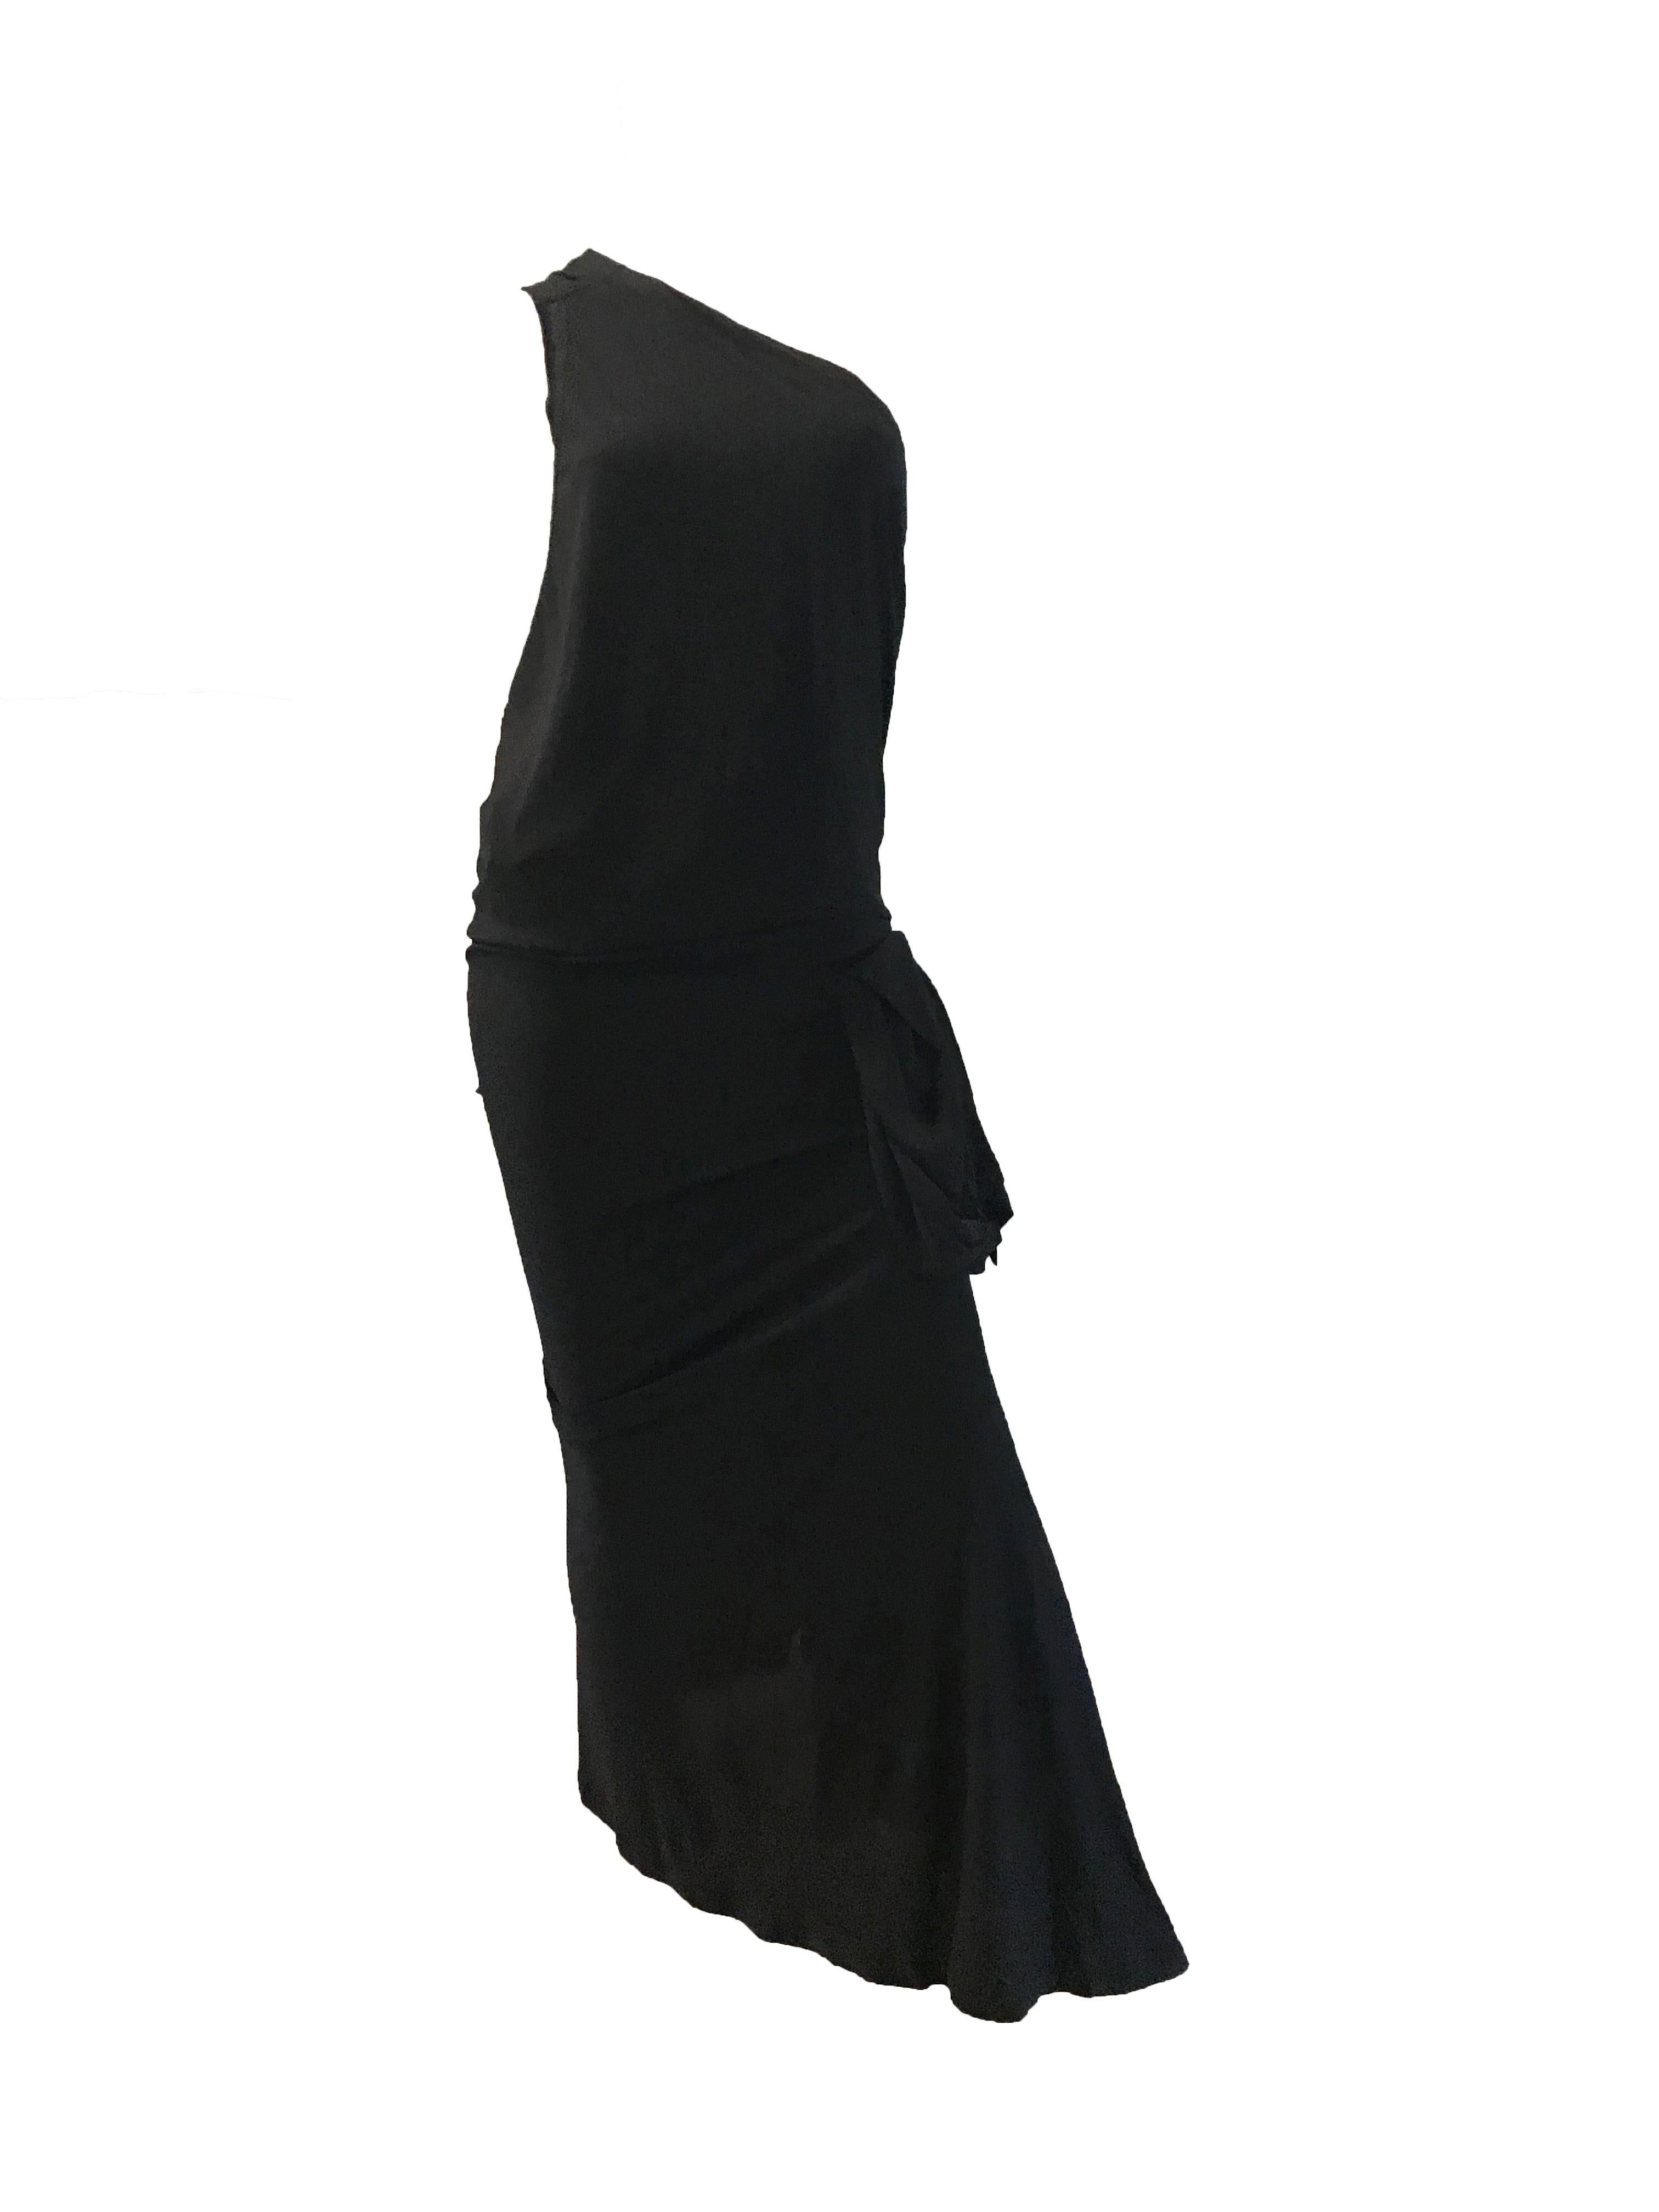 Jean Paul Gaultier black one shoulder gown with attached pouch 

100% rayon 
31